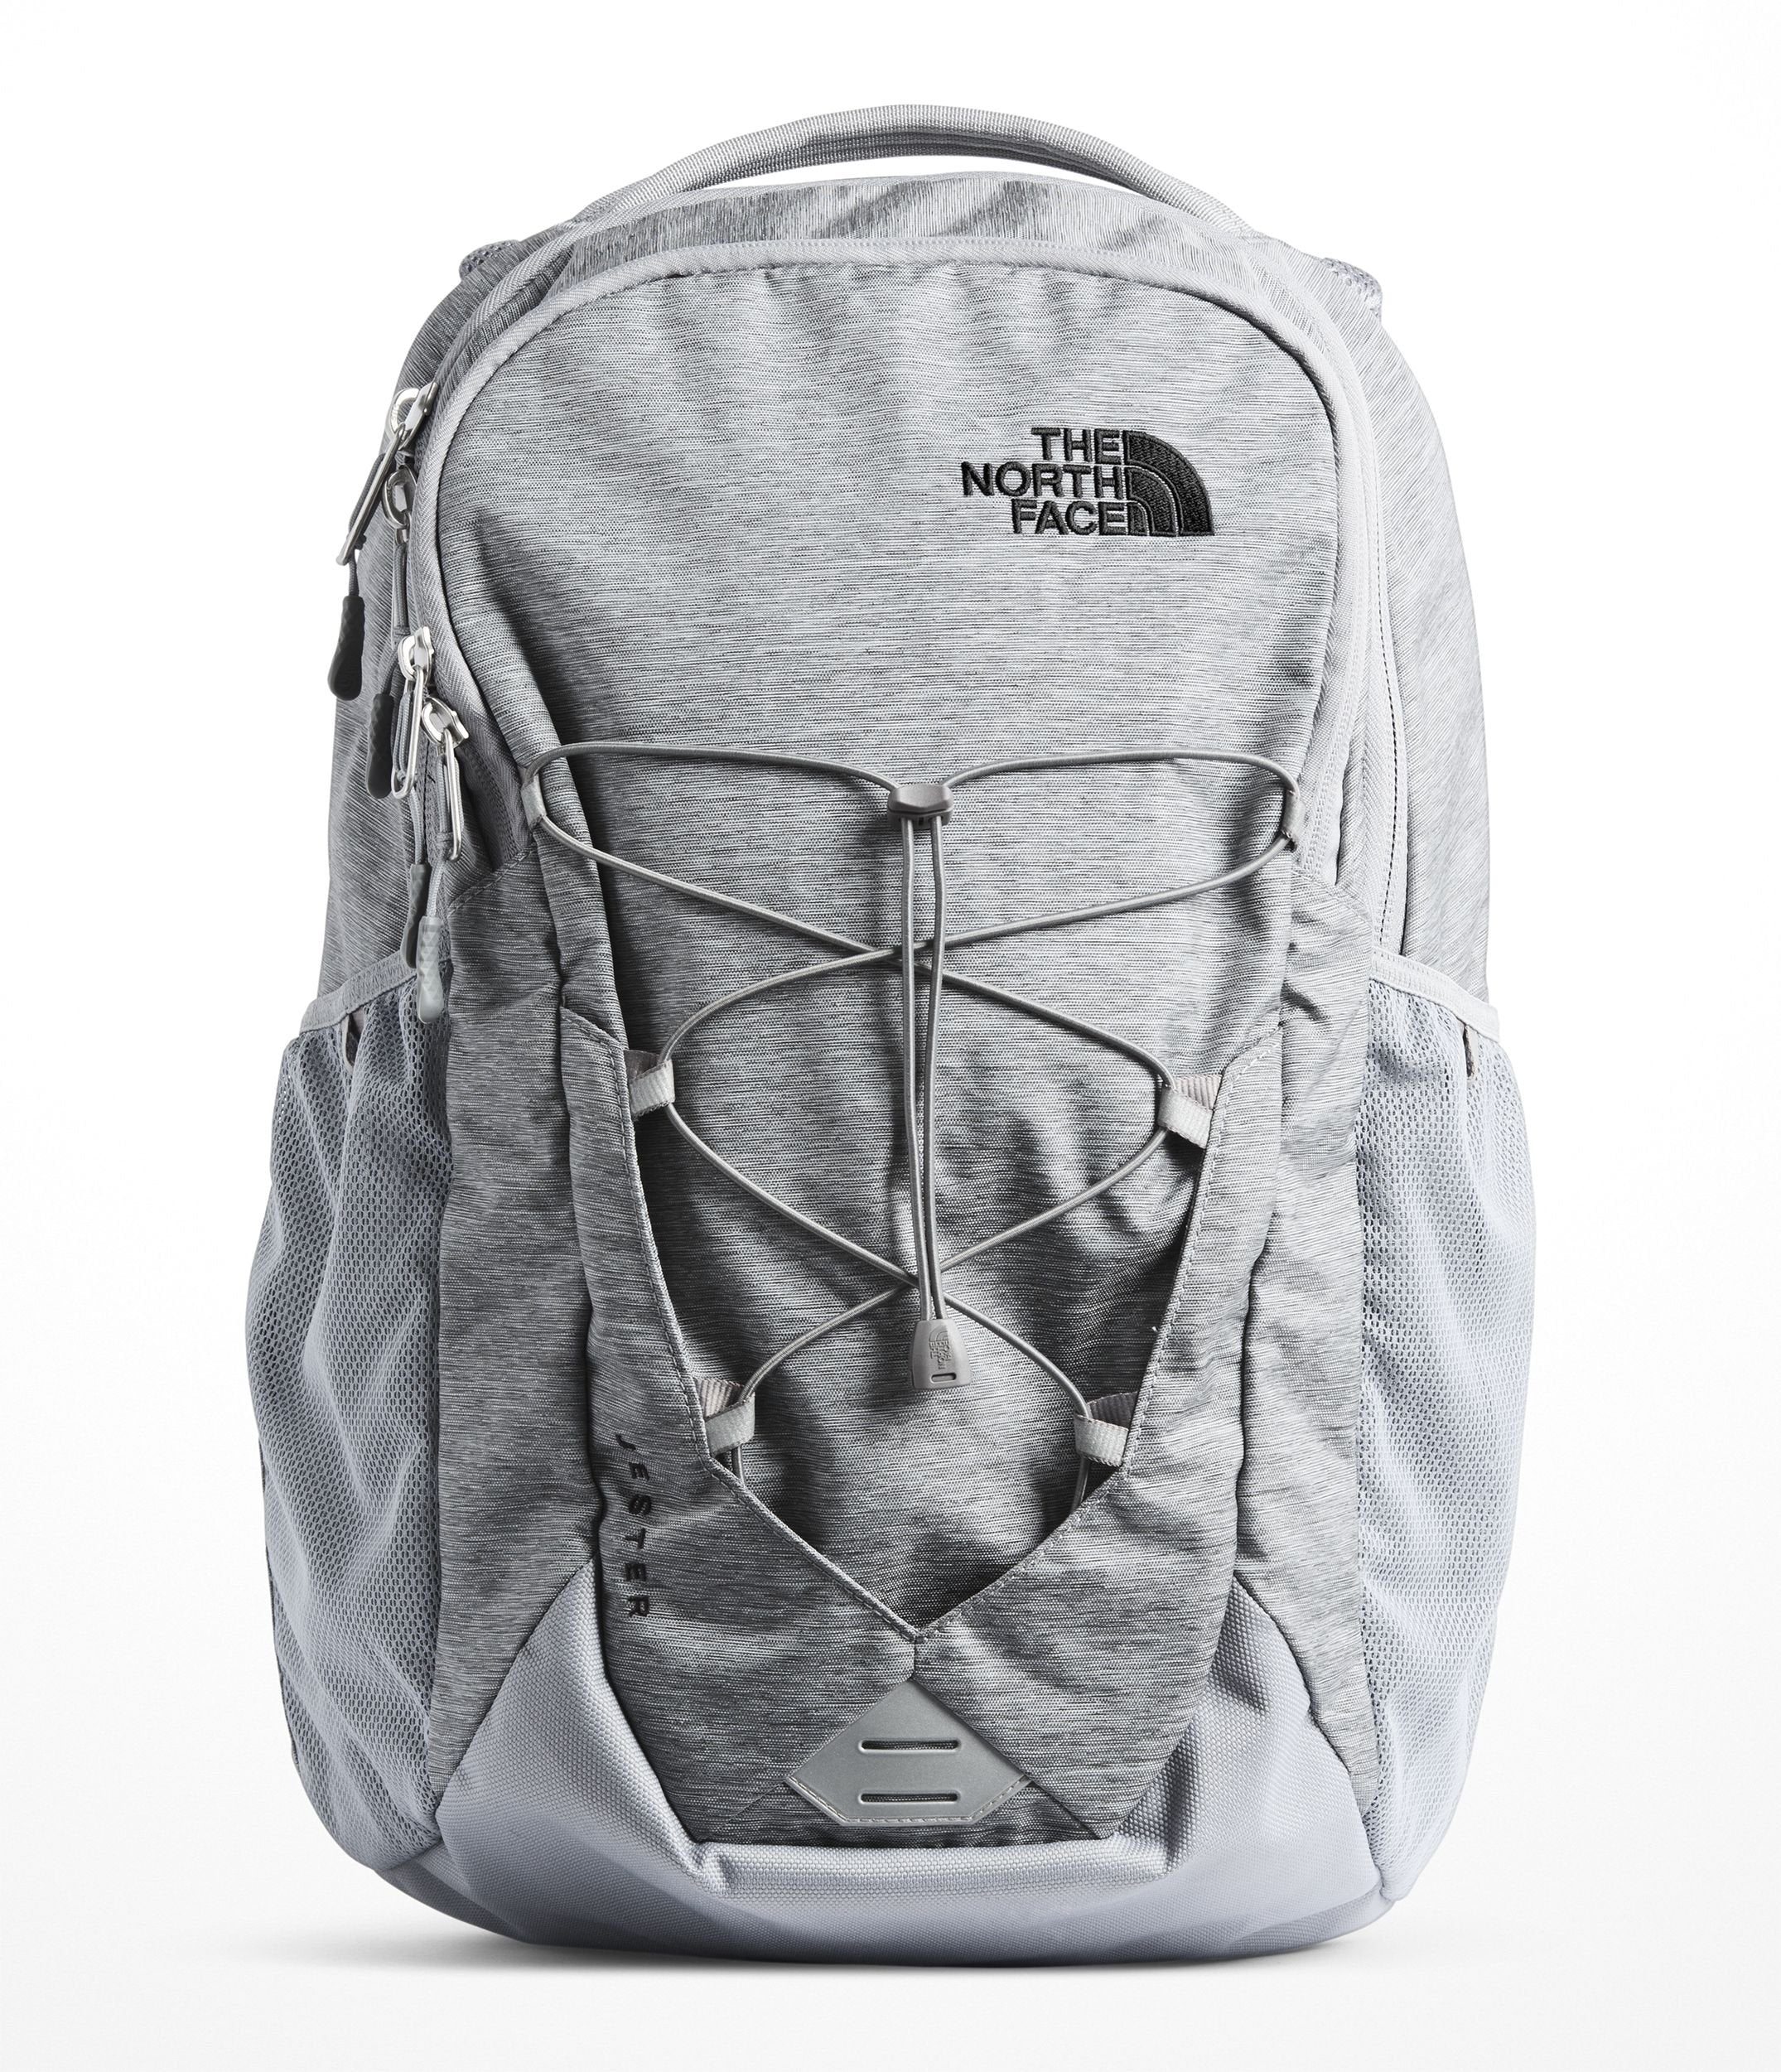 THE NORTH FACE Bags — choose from 4 from 19,99 €